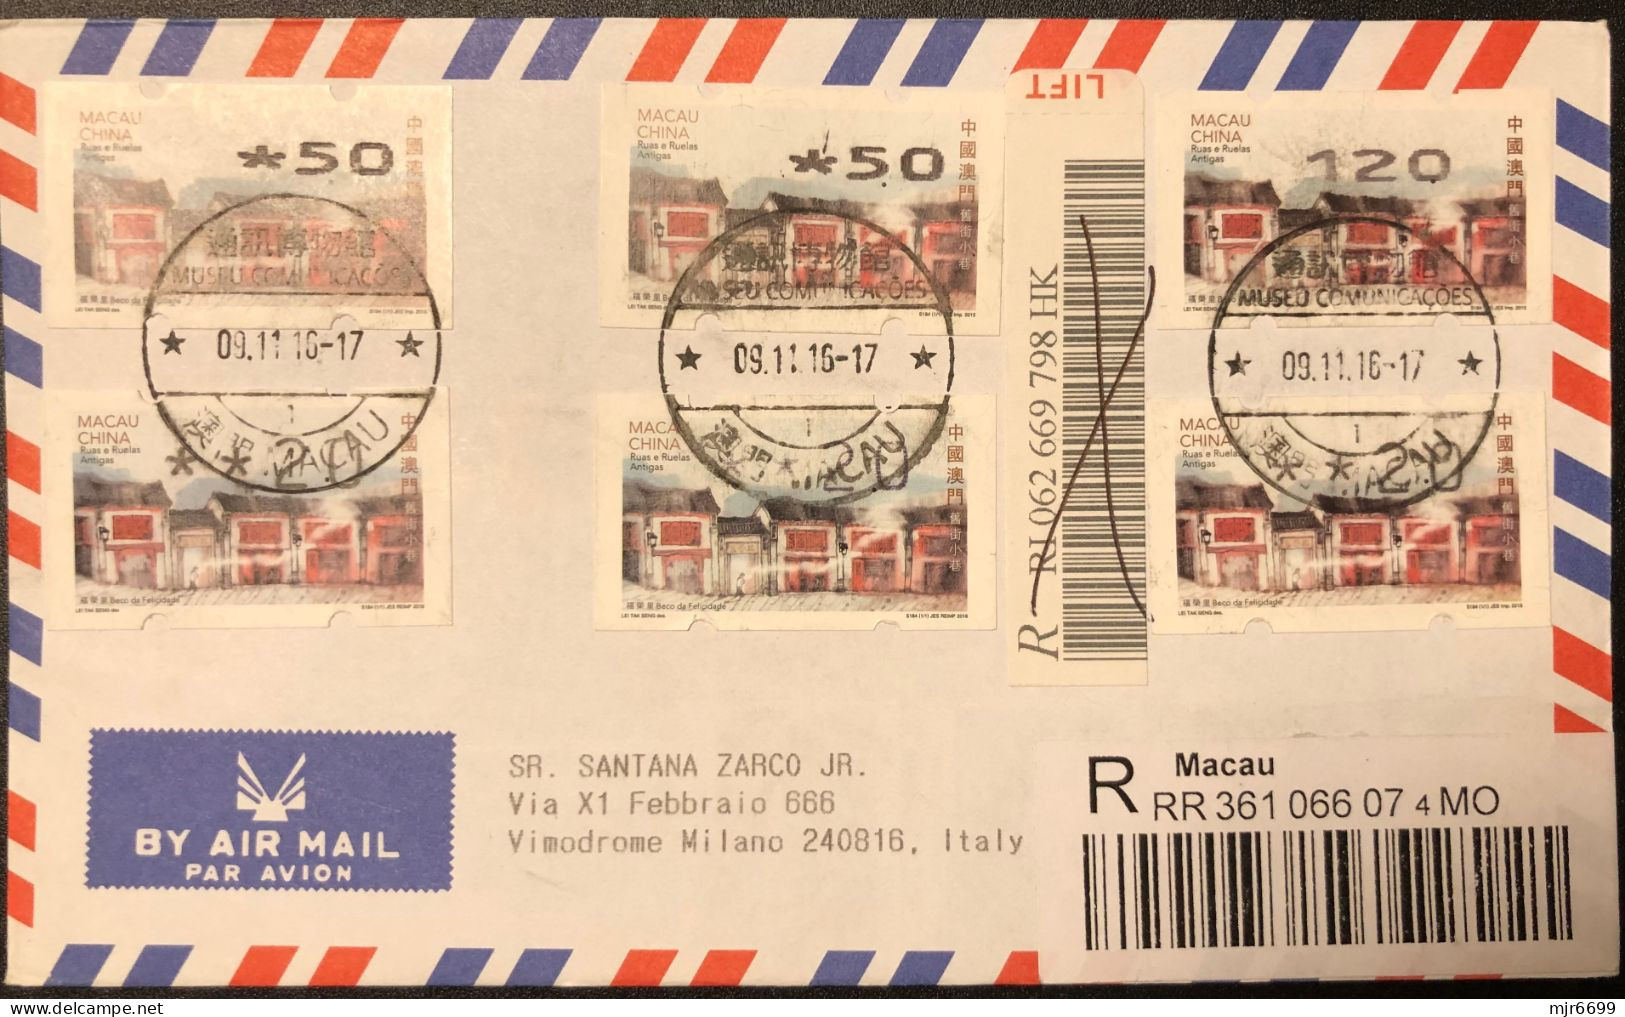 2016 MACAU ATM LABEL OLD STREETS ISSUE, REGISTERED COVER TO ITALY. 12P LABEL WITH PRINTING ERROR, Shift Left. - Distributors